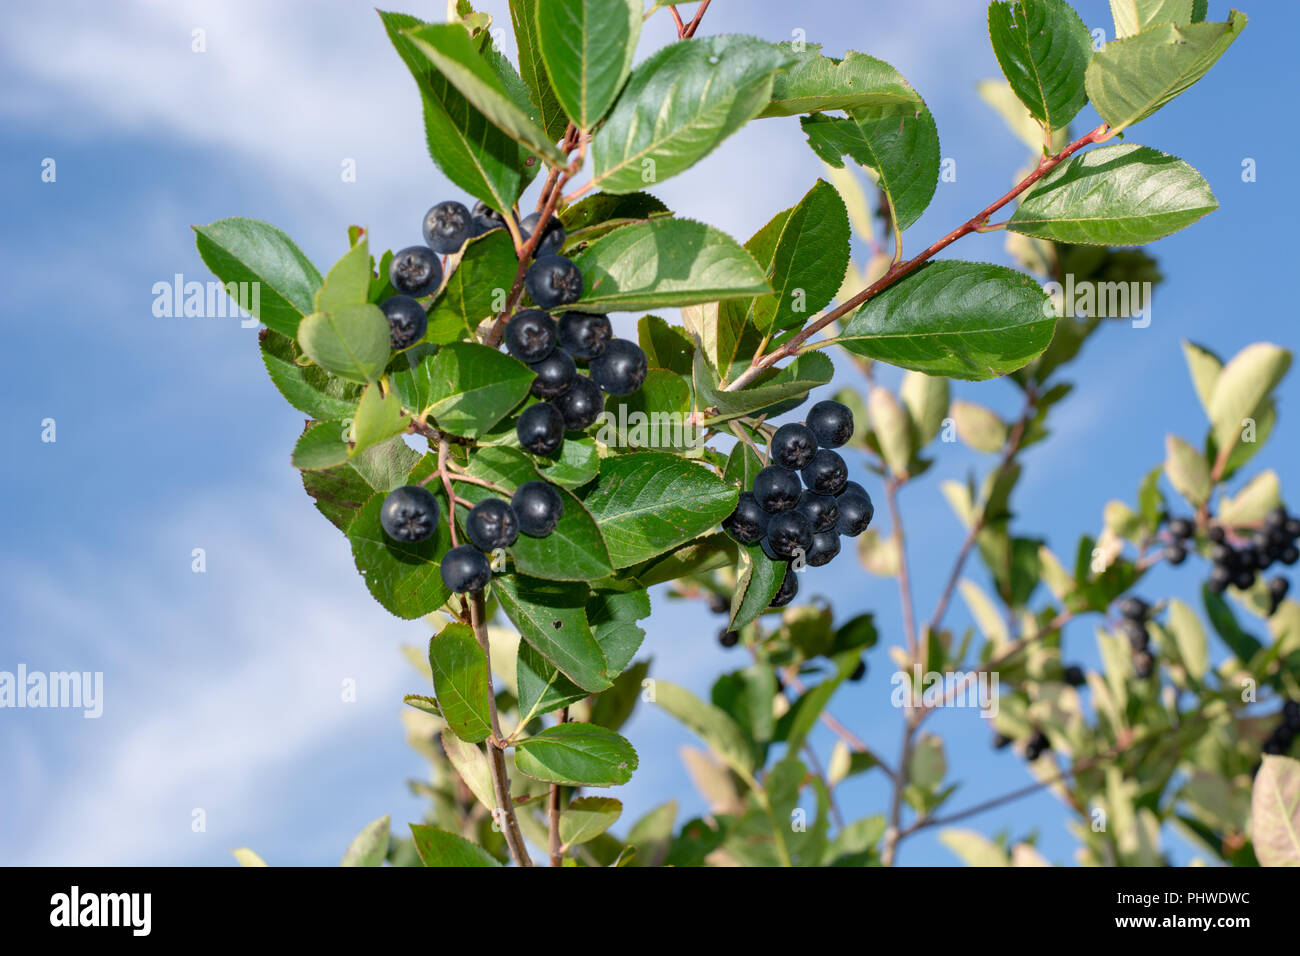 Branch filled with aronia berries. Stock Photo